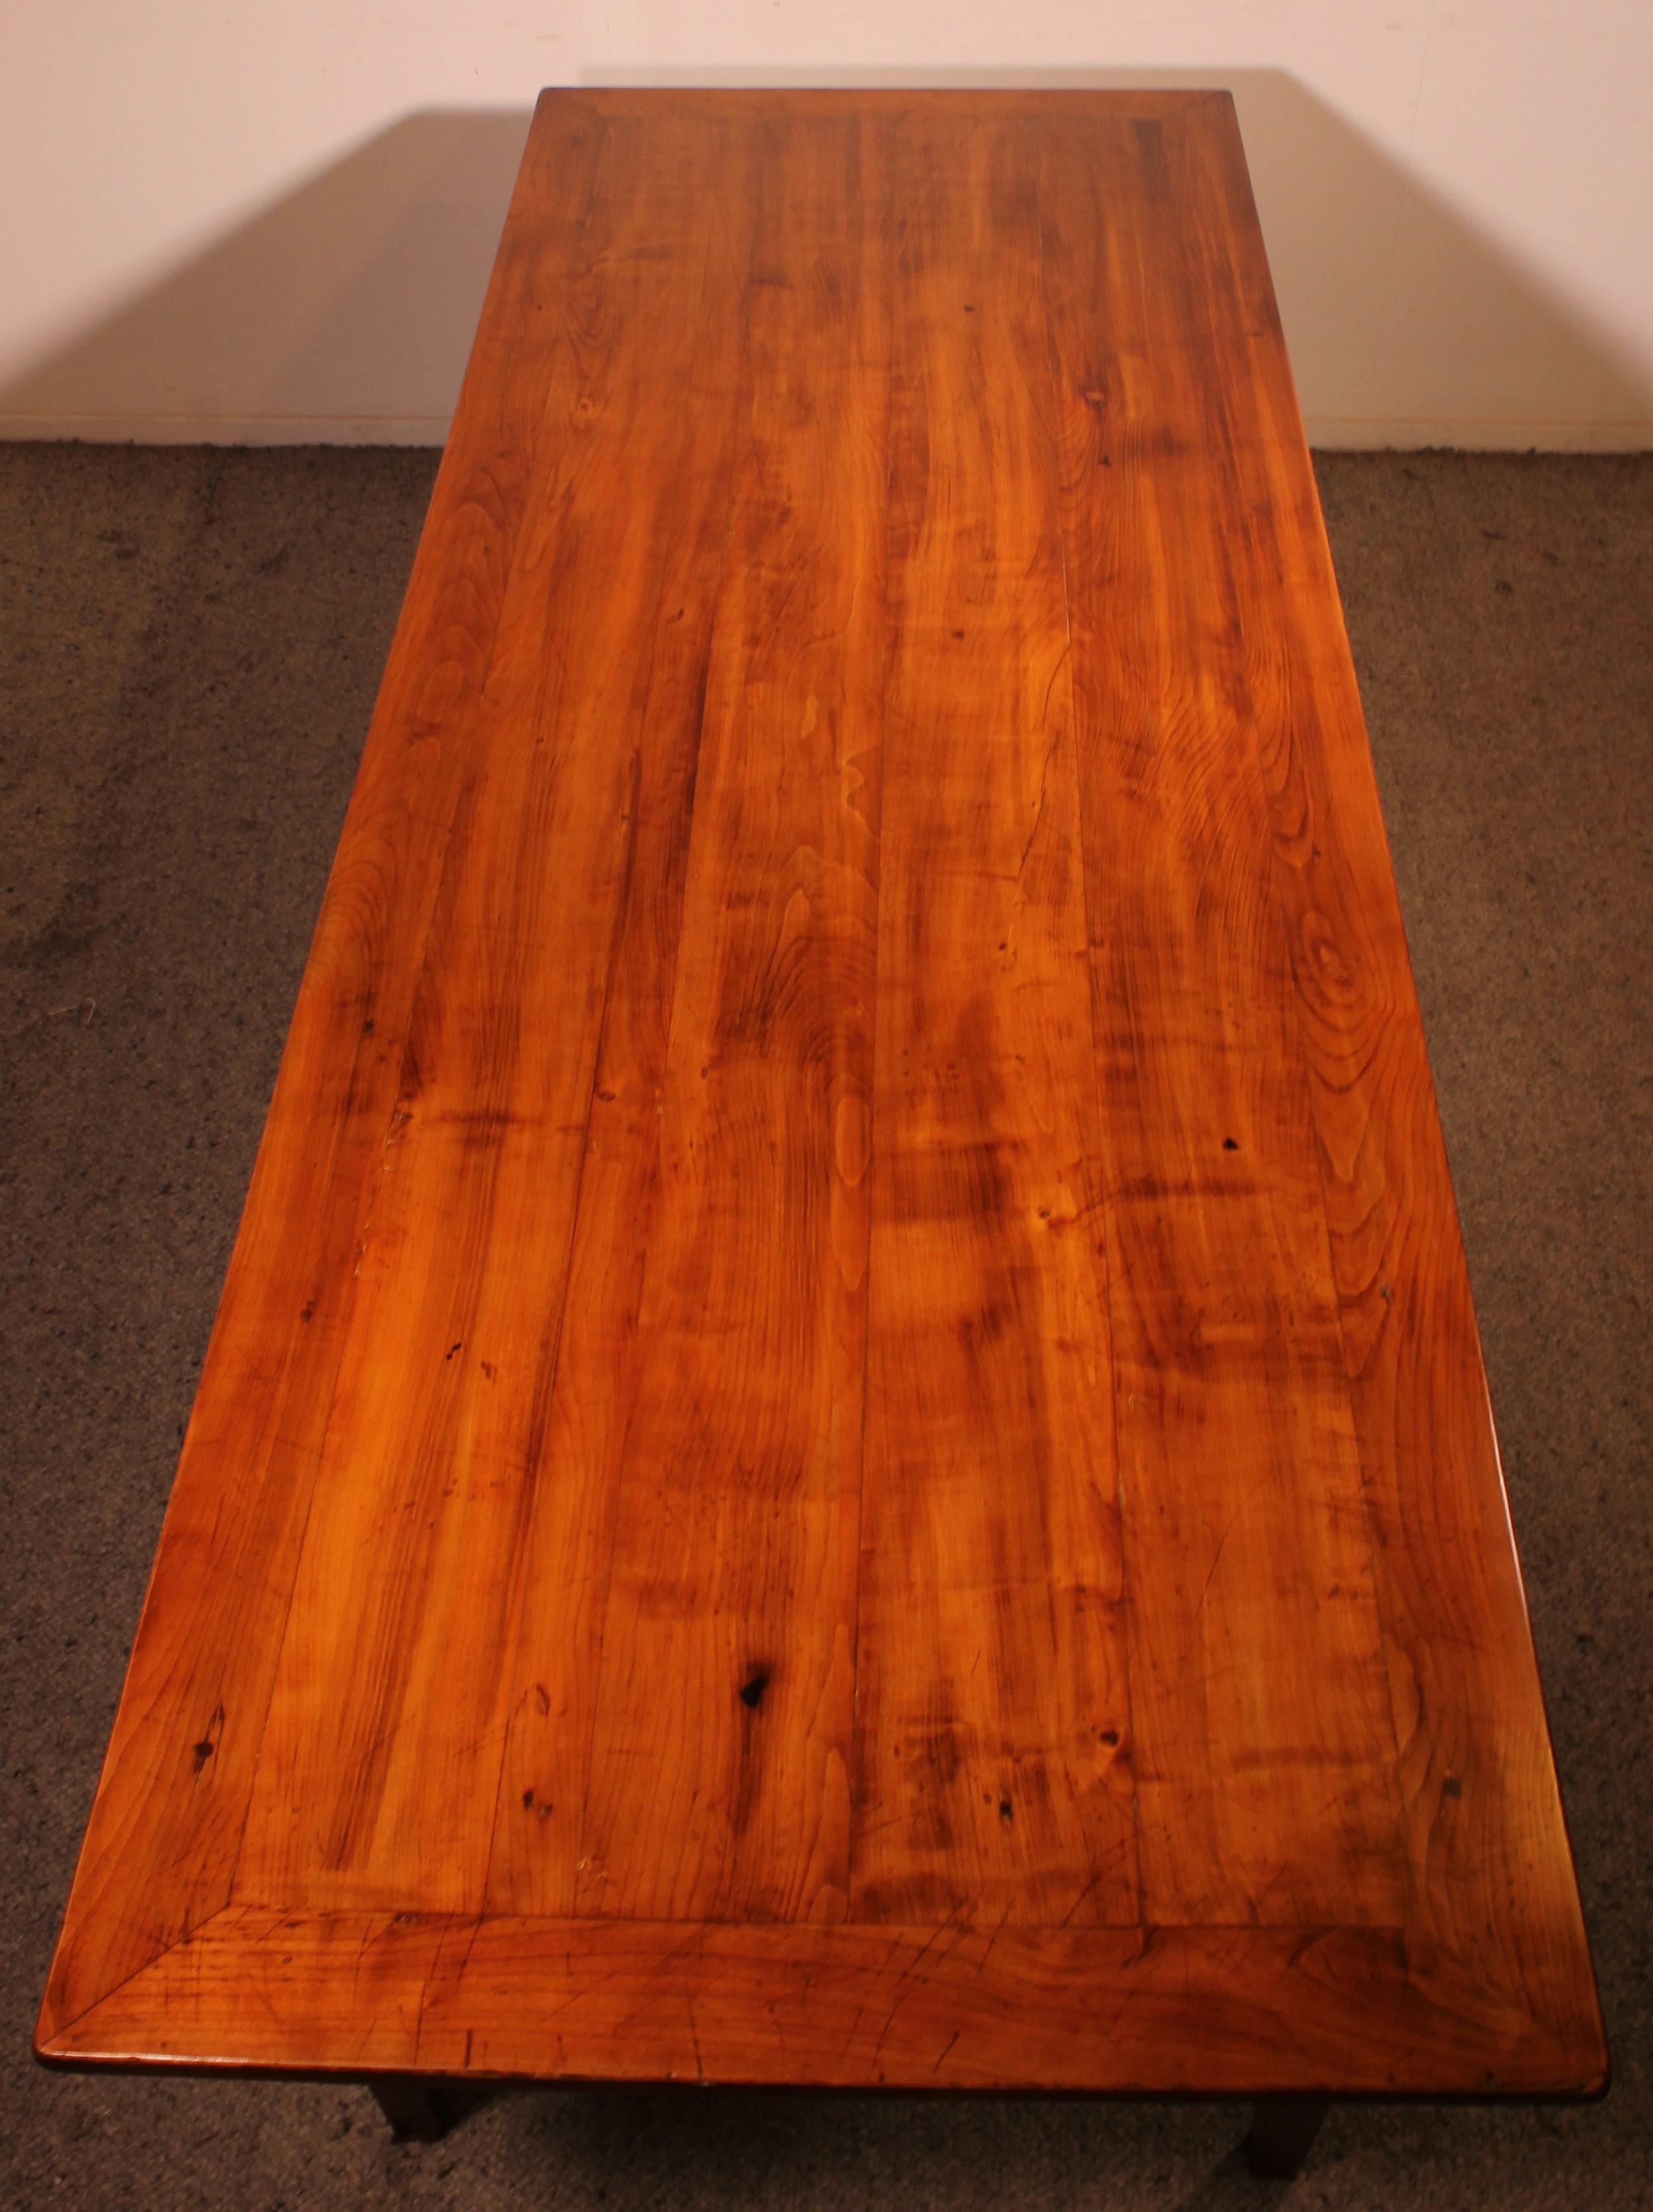 Large 19th Century Cherry Wood Refectory Table With A Width Of 100cm For Sale 8